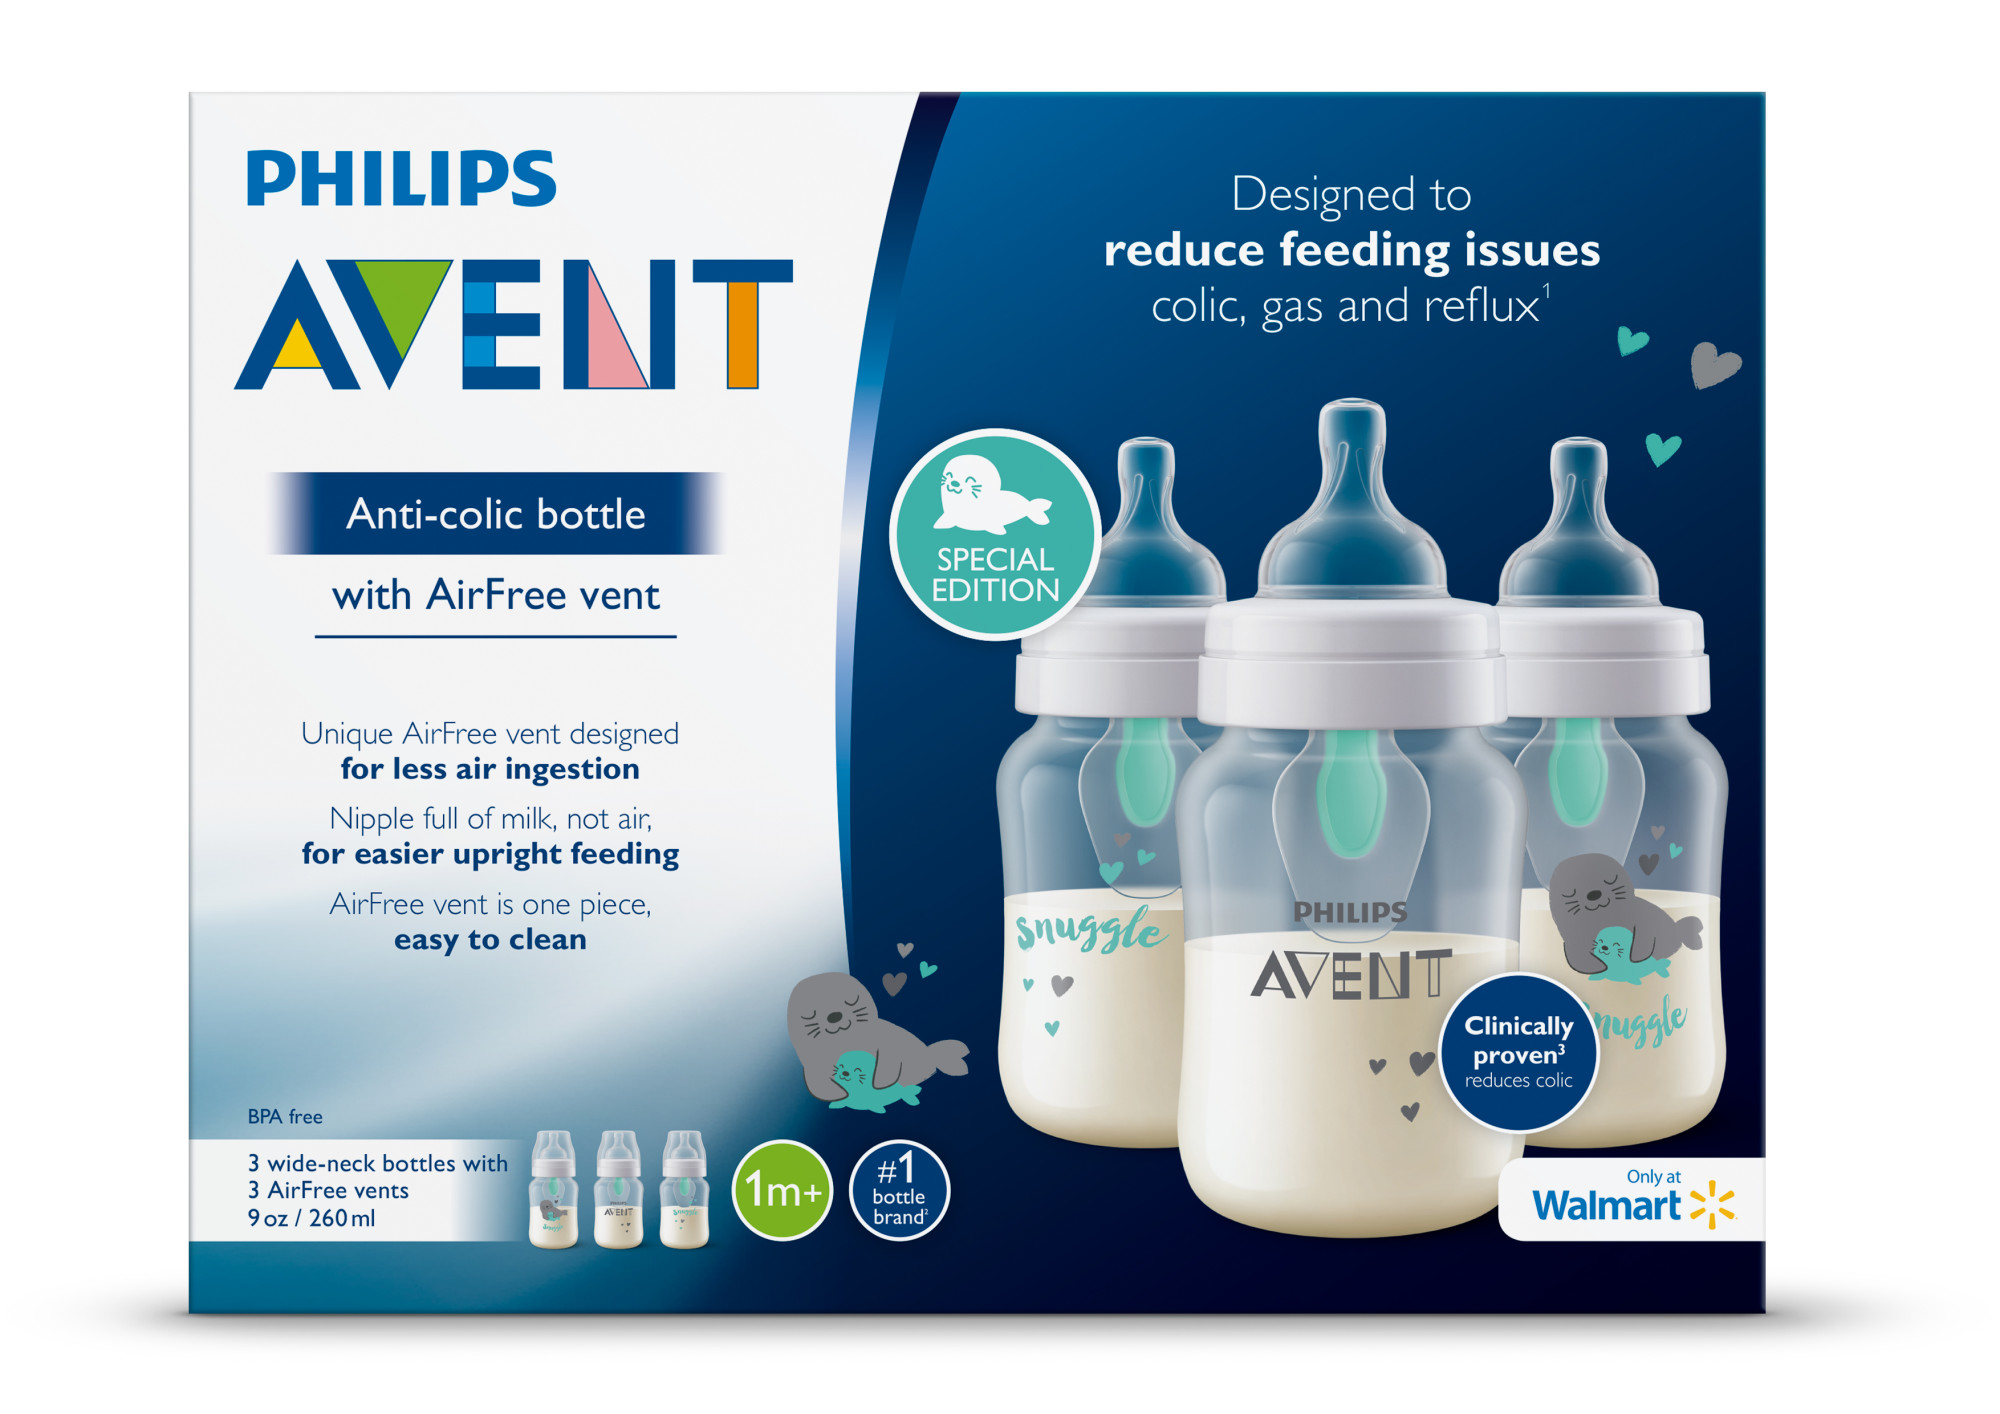 Philips Avent Anti-colic Baby Bottle with AirFree Vent with Seal Design, 9oz, 3pk, SCF408/34 - image 3 of 6